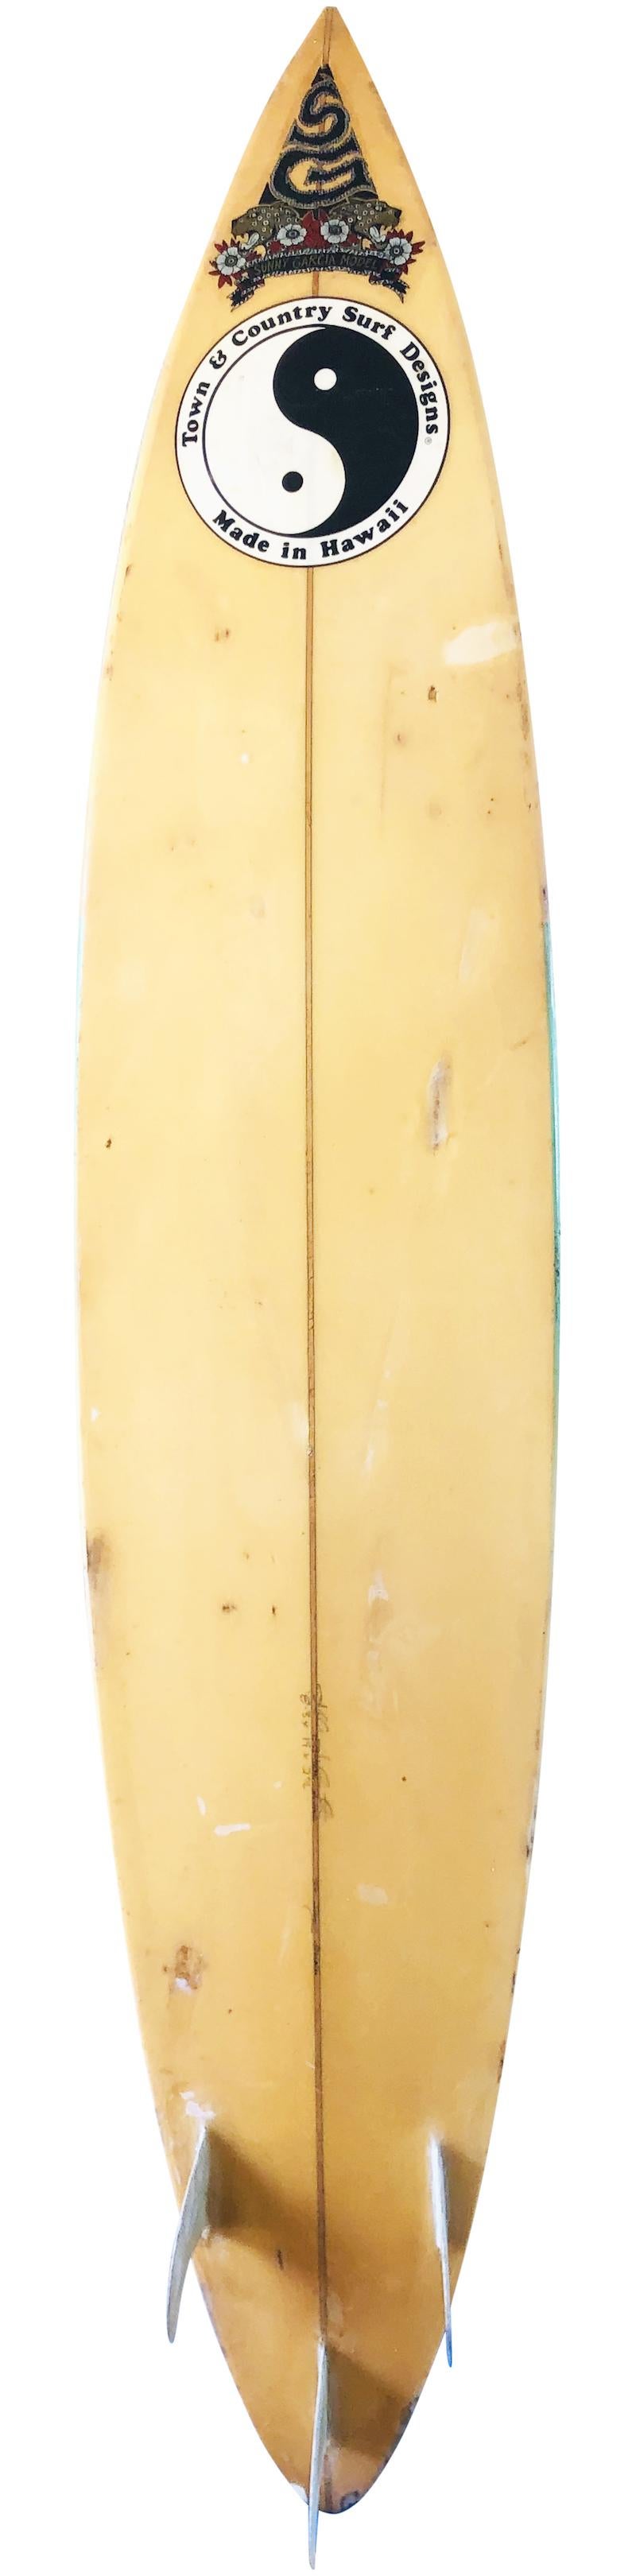 Early 1990s Town & Country Sunny Garcia model surfboard shaped by Jeff Johnston. Made for the 2000 ASP World Champion, Sunny Garcia. Features a round pin design with glassed on thruster (tri-fin) setup. Featuring rare Sunny Garcia model laminate